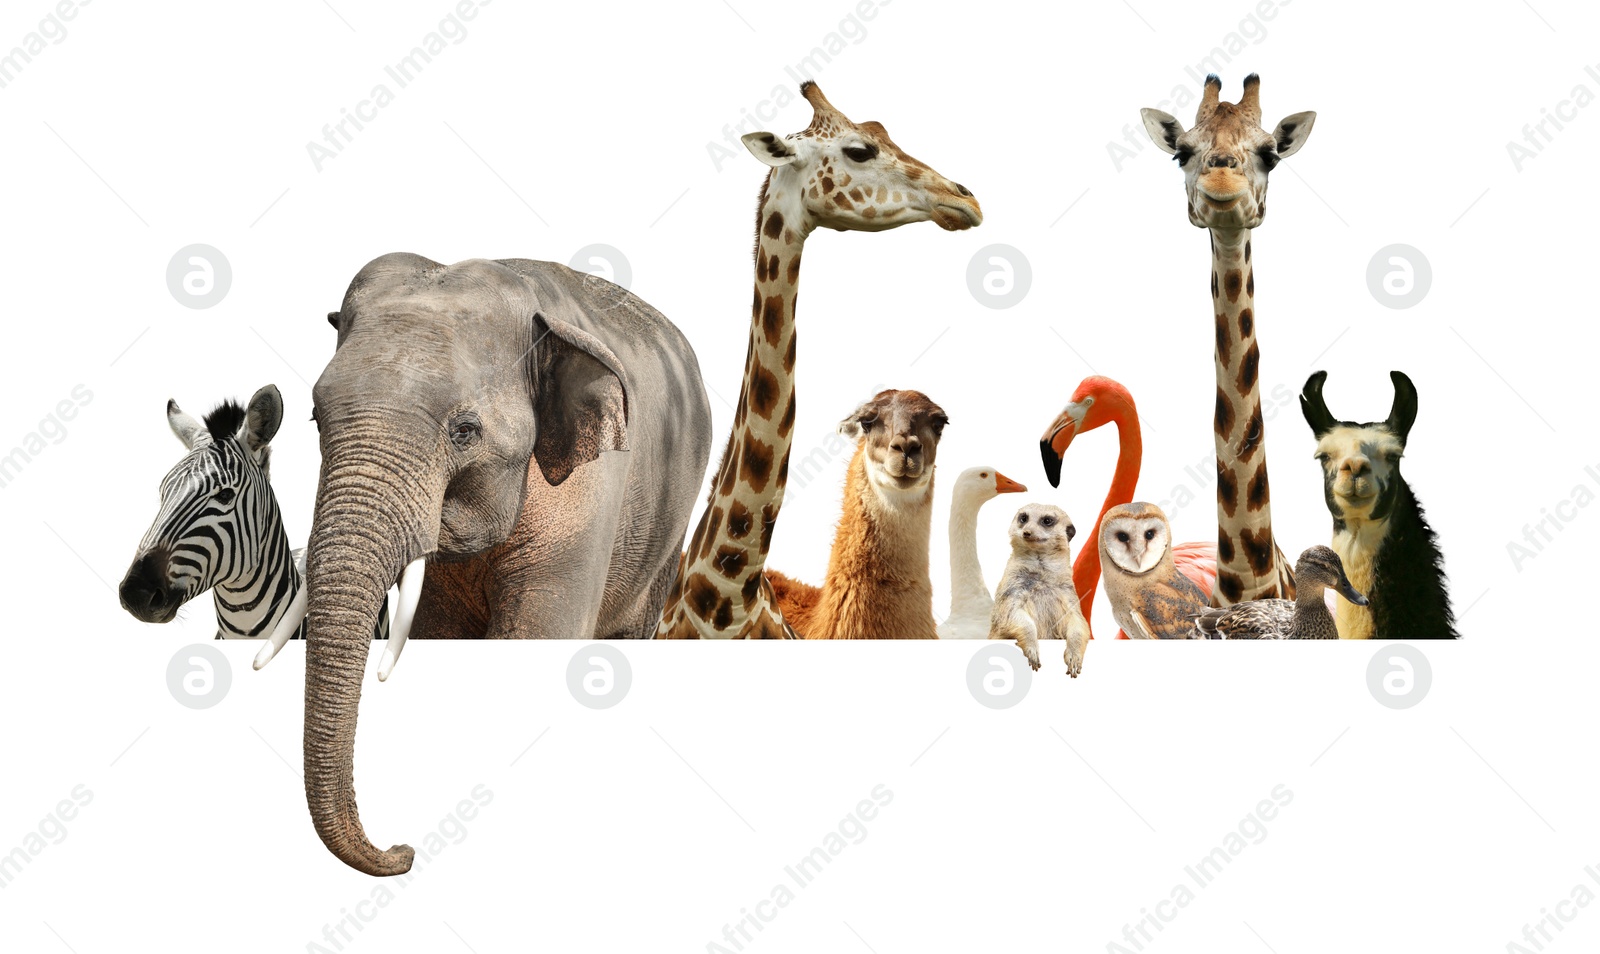 Image of Group of different wild animals standing behind banner on white background, collage